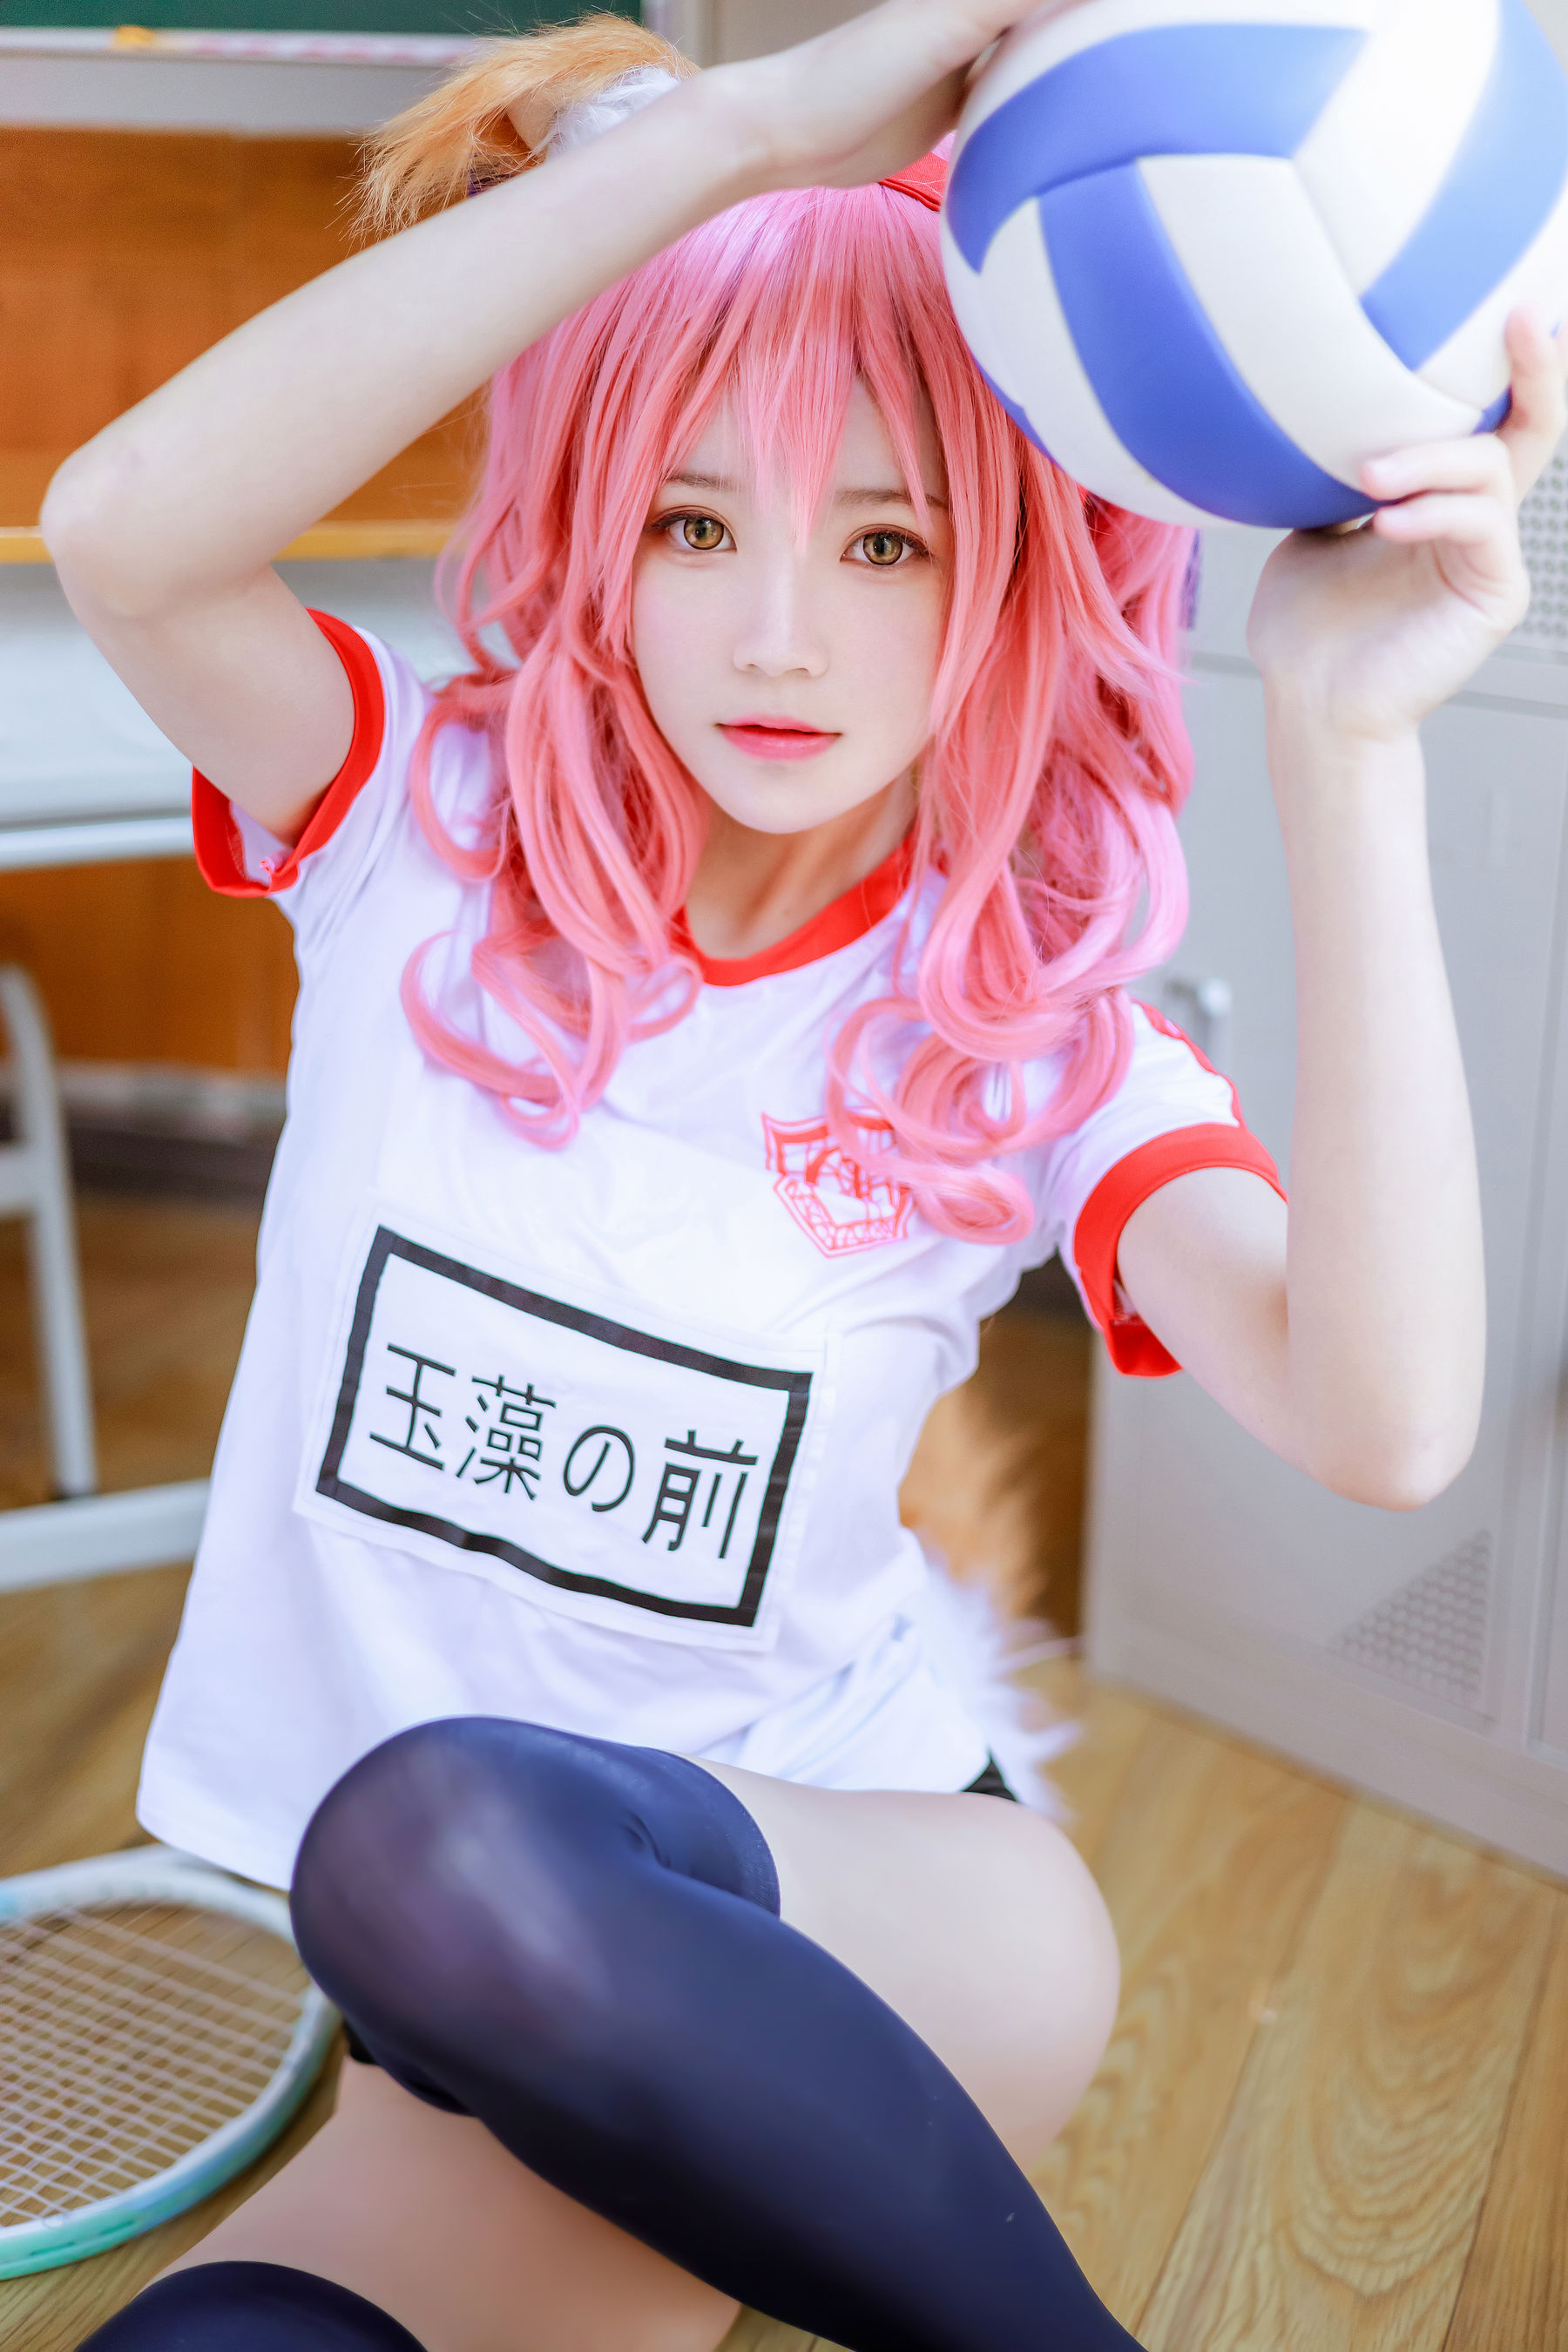 [Net Red COSER Photo] Cherry Peach Meow - Tamamo former gym suit Page 1 No.605ec0